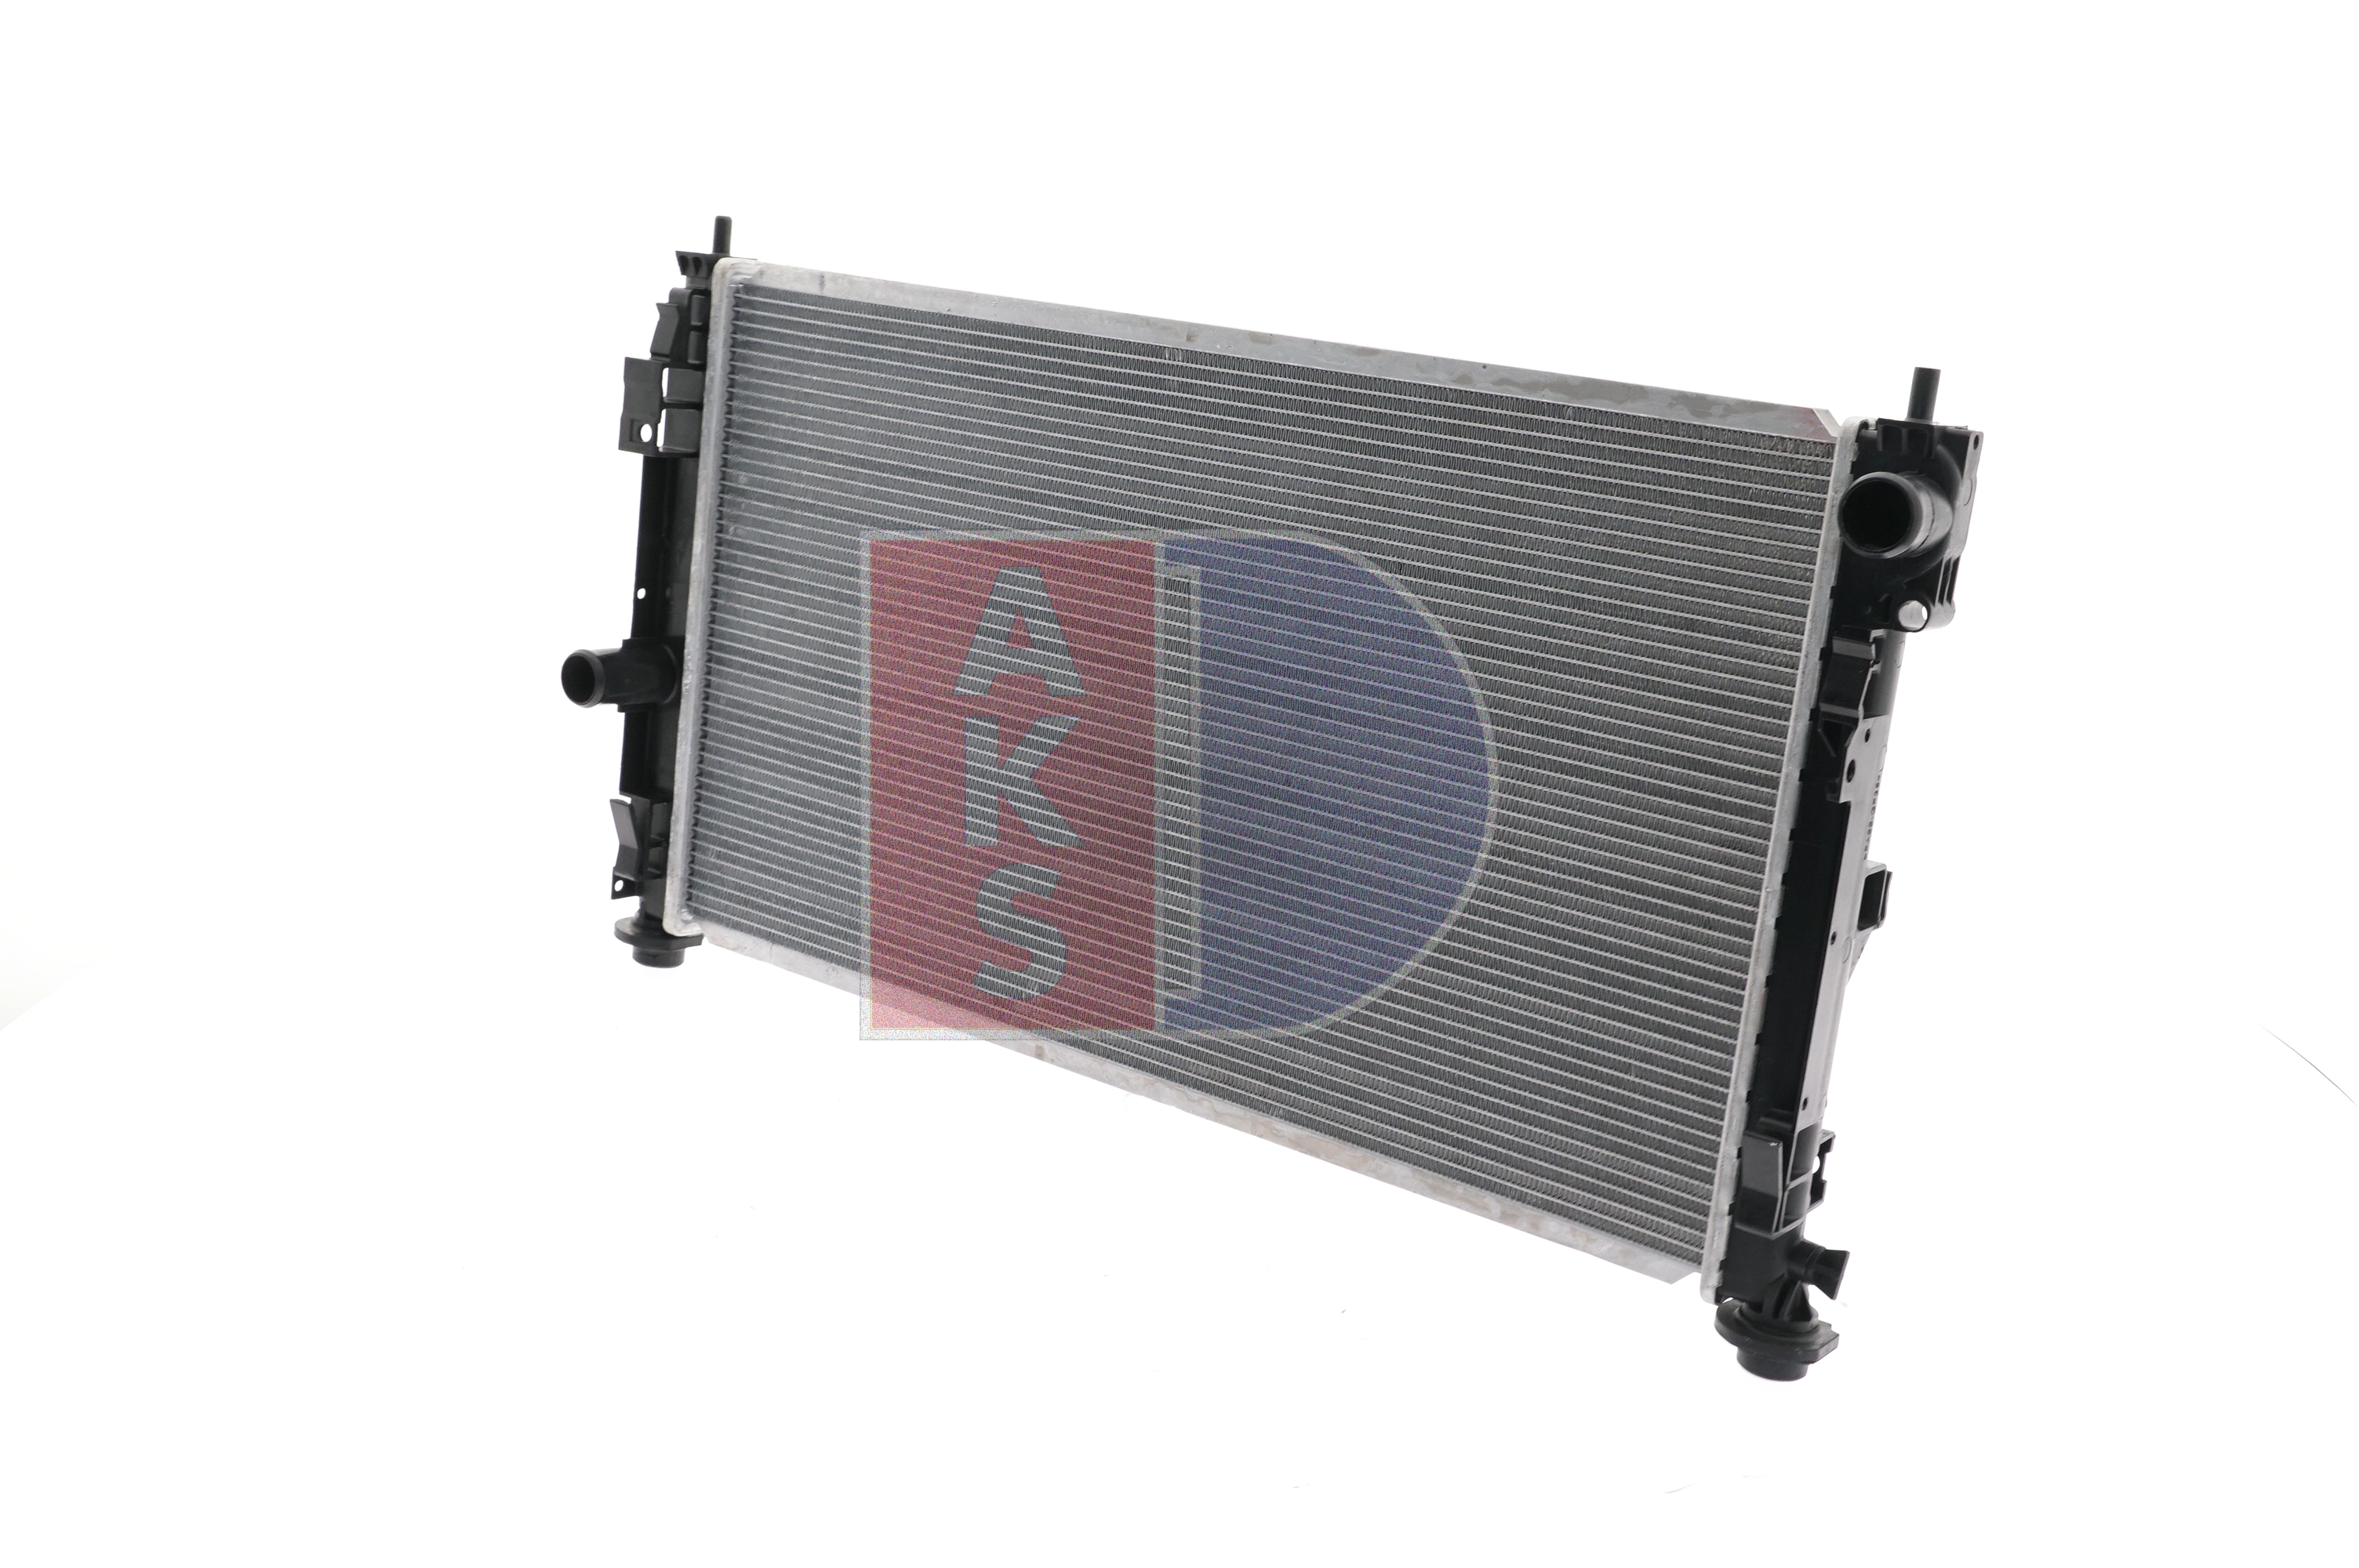 AKS DASIS 520128N Engine radiator Aluminium, for vehicles with/without air conditioning, 700 x 397 x 16 mm, Manual Transmission, Brazed cooling fins